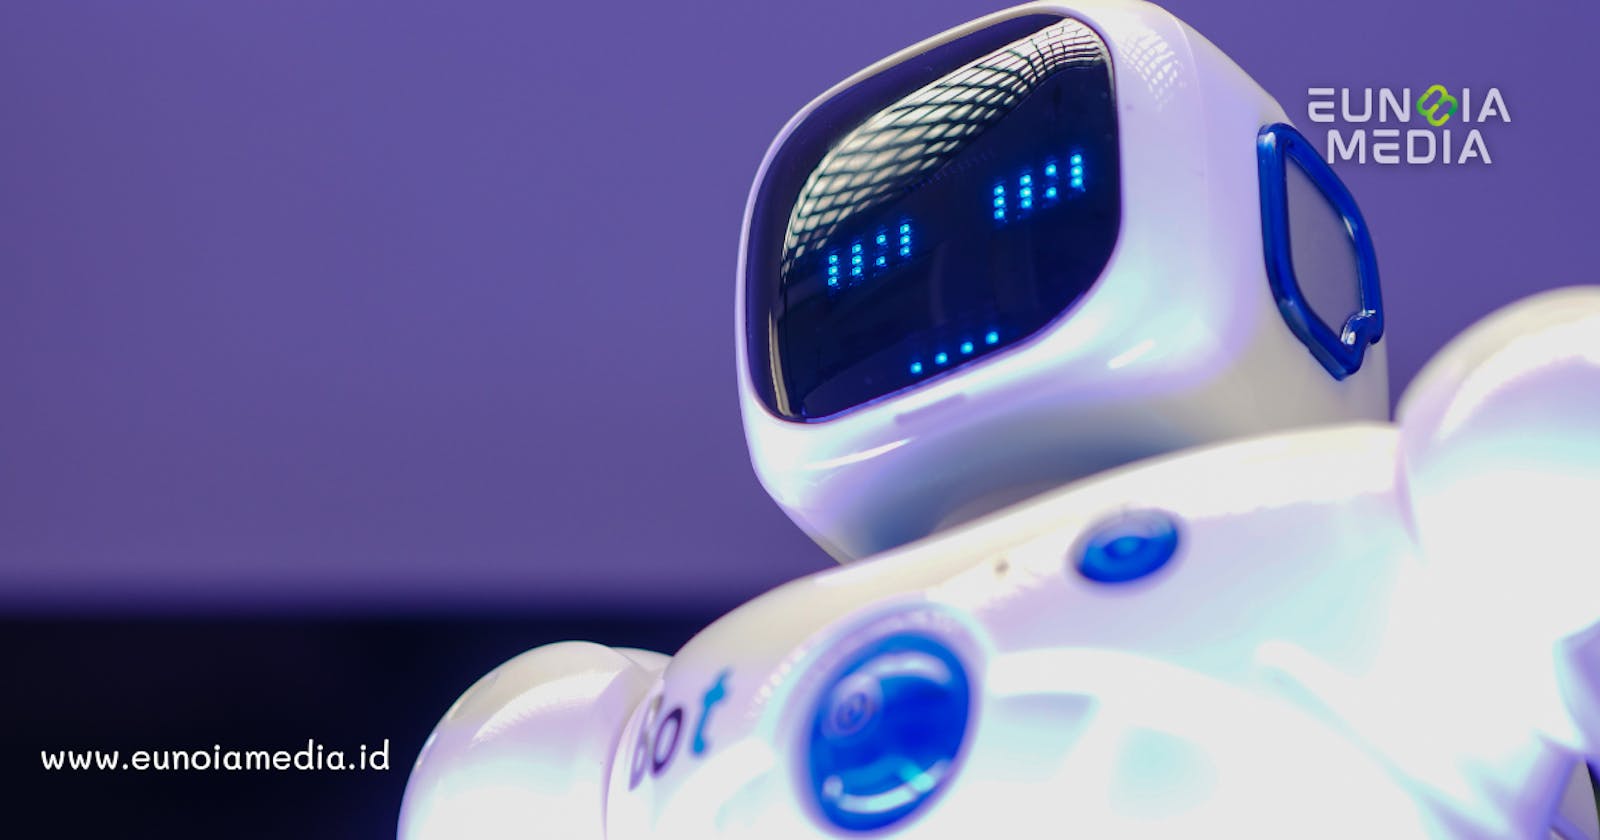 Baidu Will Launch a ChatGPT-Like AI Chatbot in March